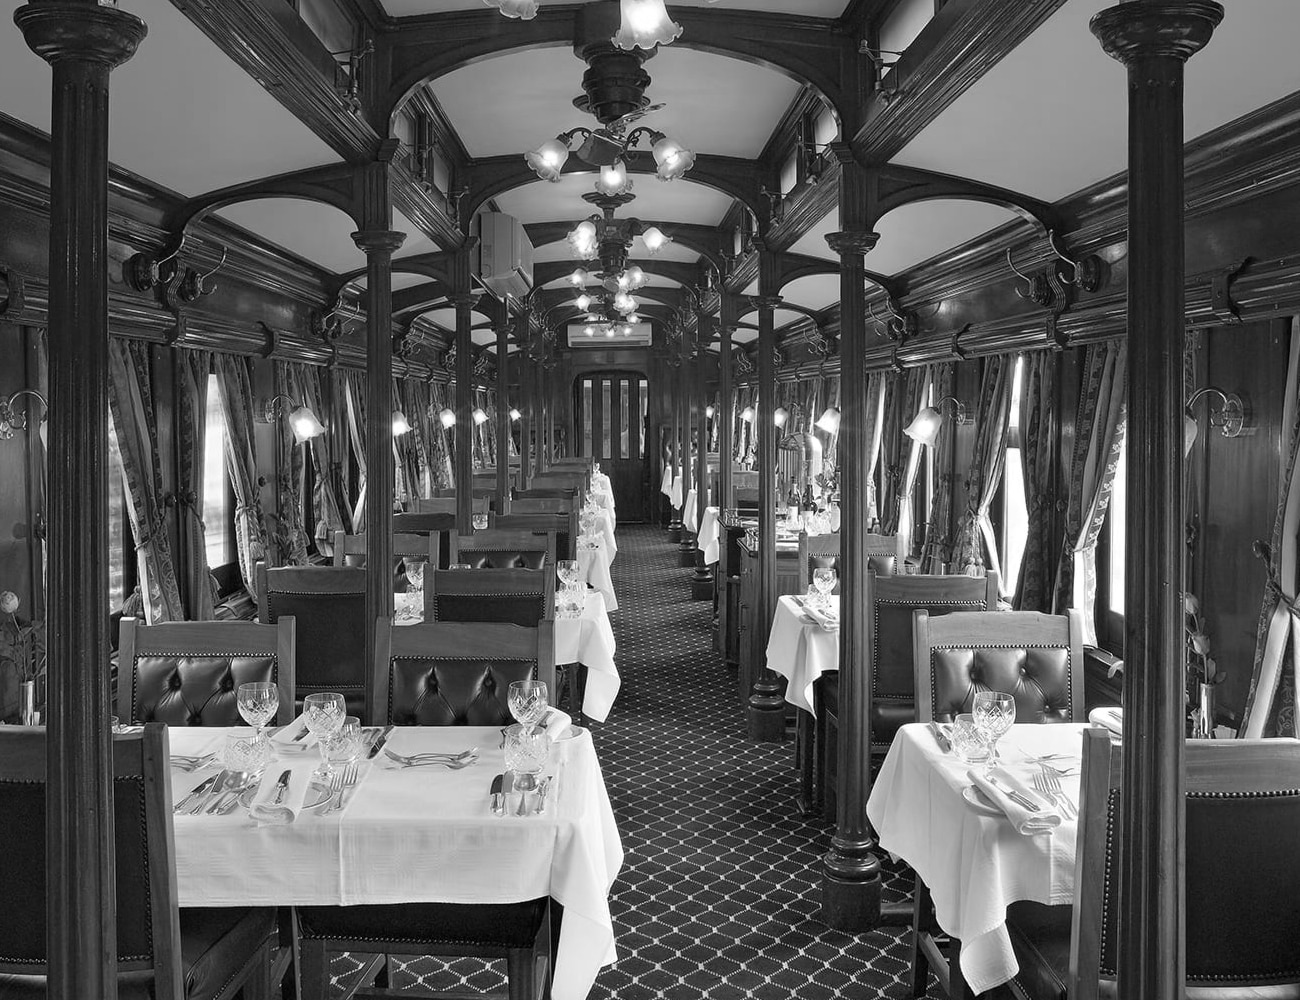 Luxury Dining in Rovos Train, South Africa